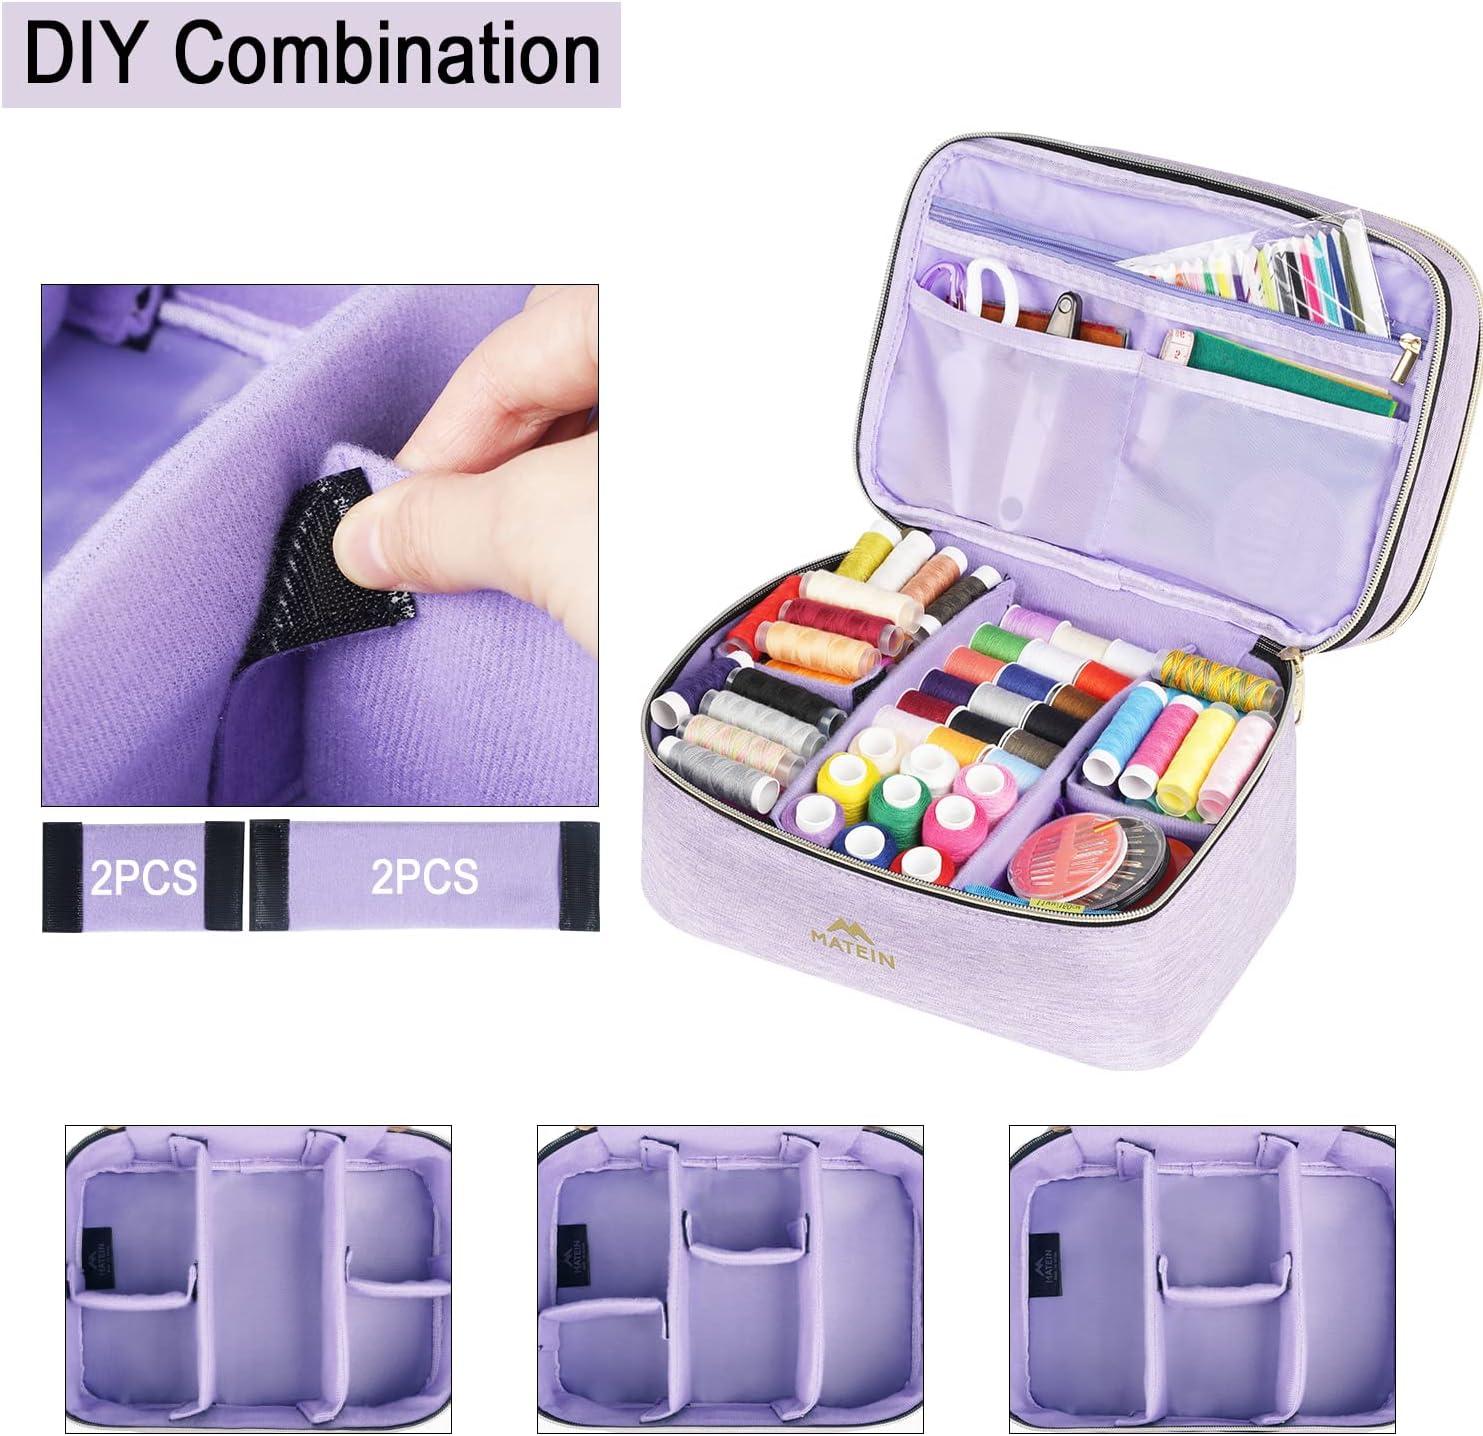 Pin on Sewing Supplier Storage